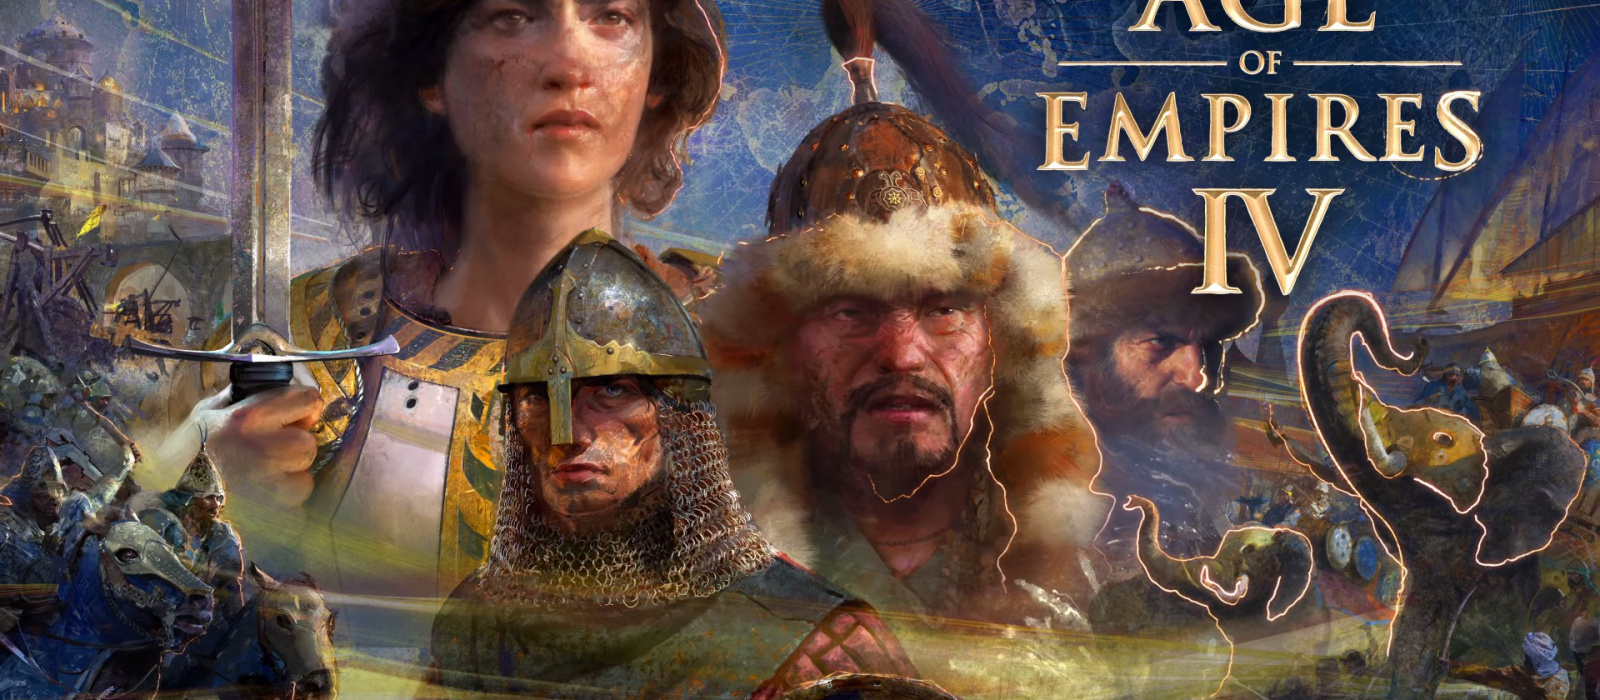 A beginner's guide to Age of Empires 4. How to succeed in peacetime, how to win a war and choose the right nation